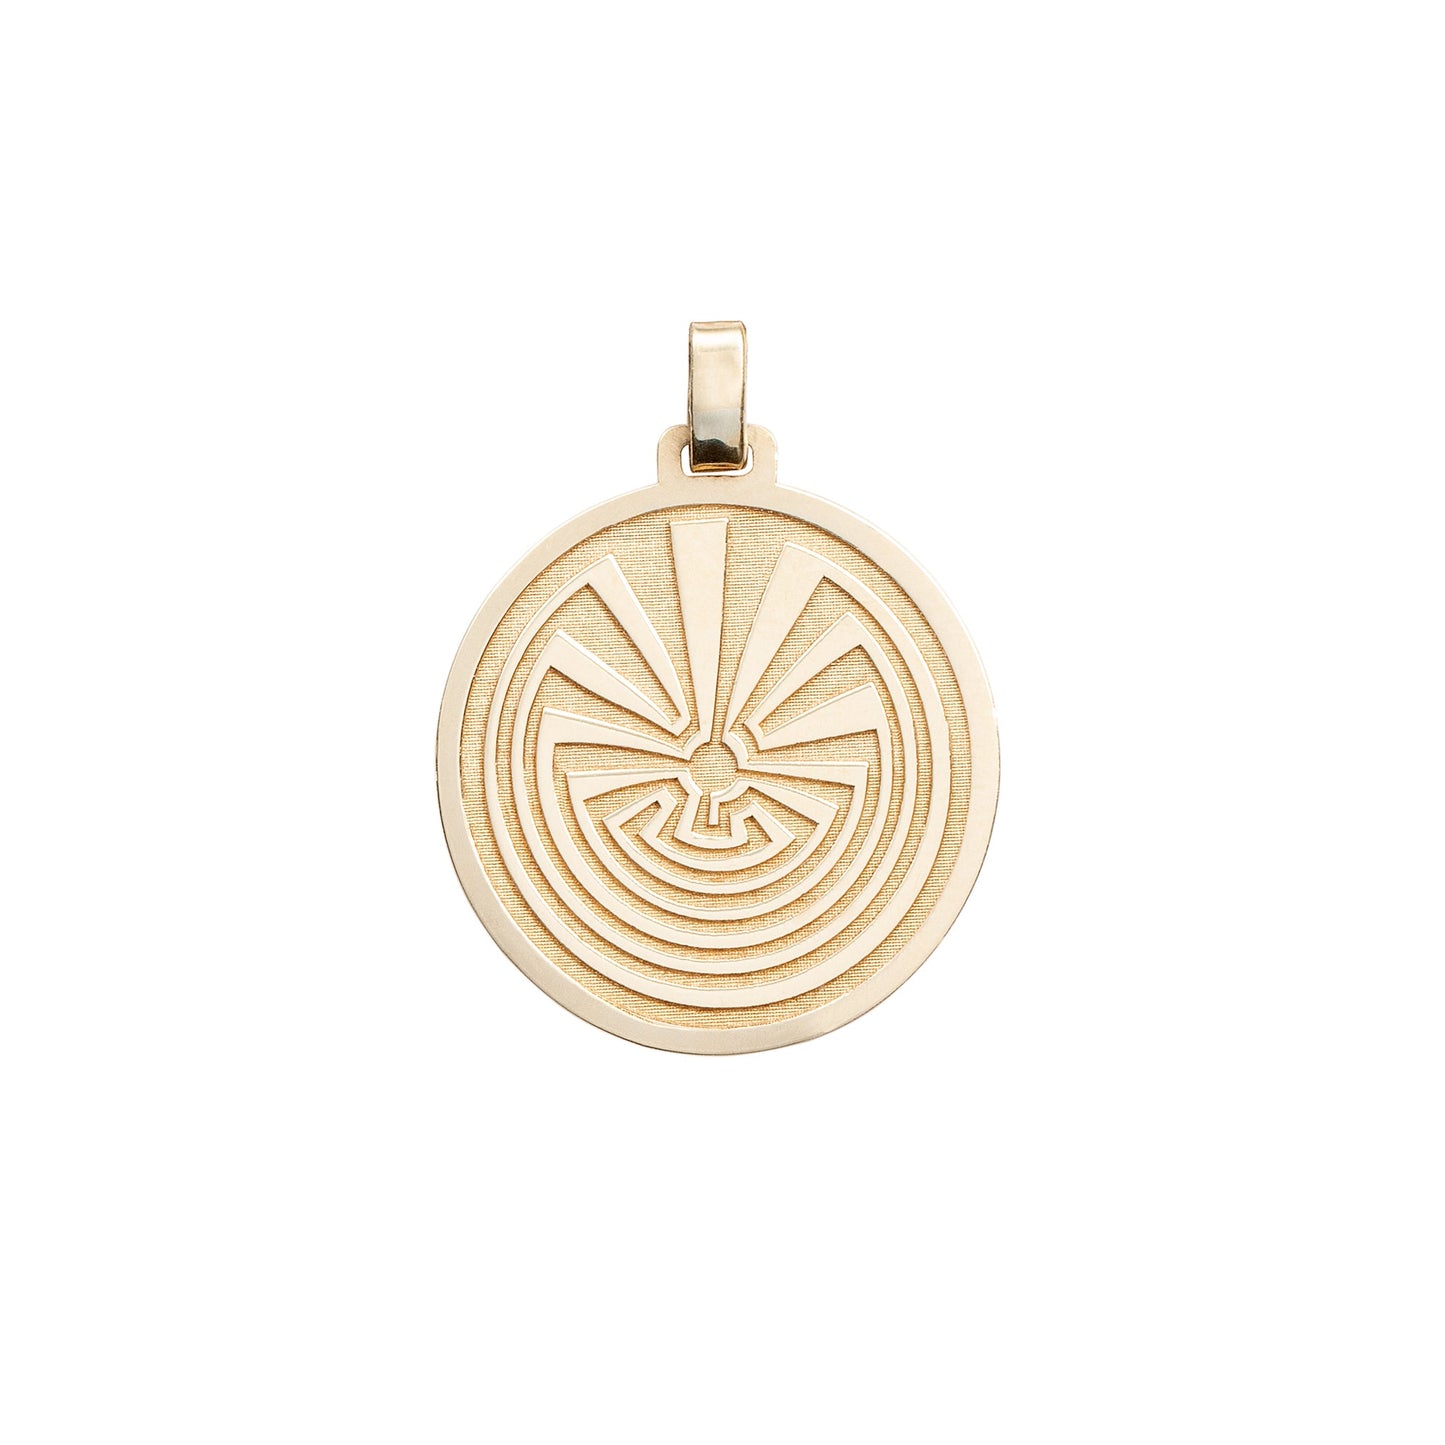 The Man in The Maze Medallion